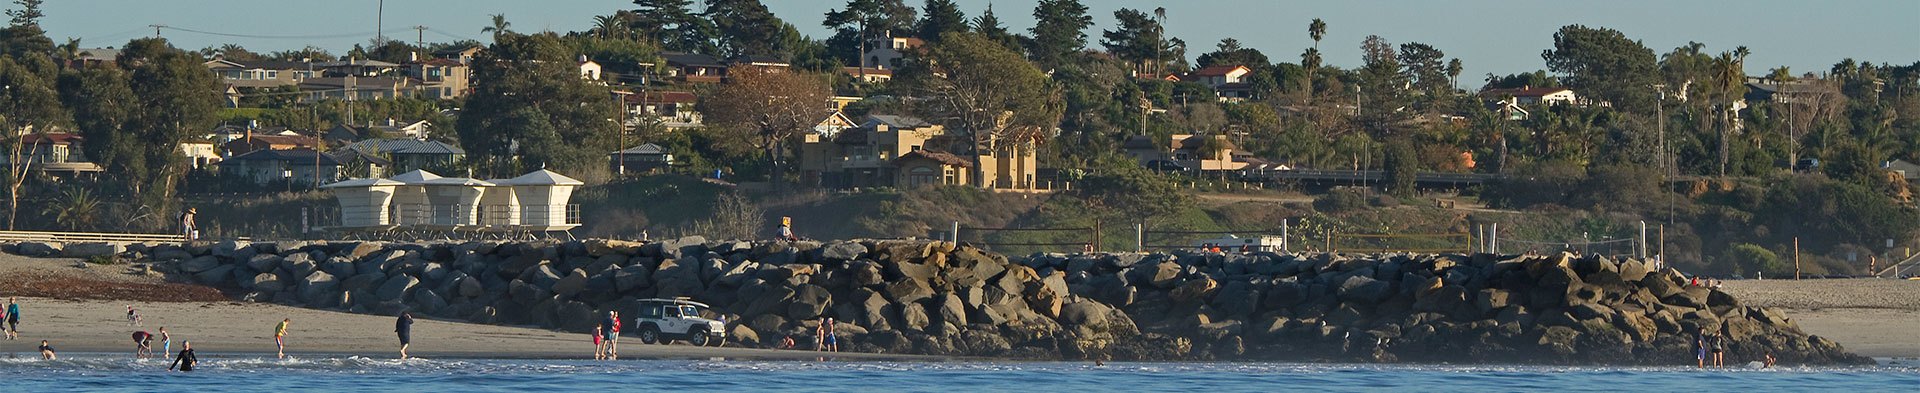 A view of North County Coastal from the beach.